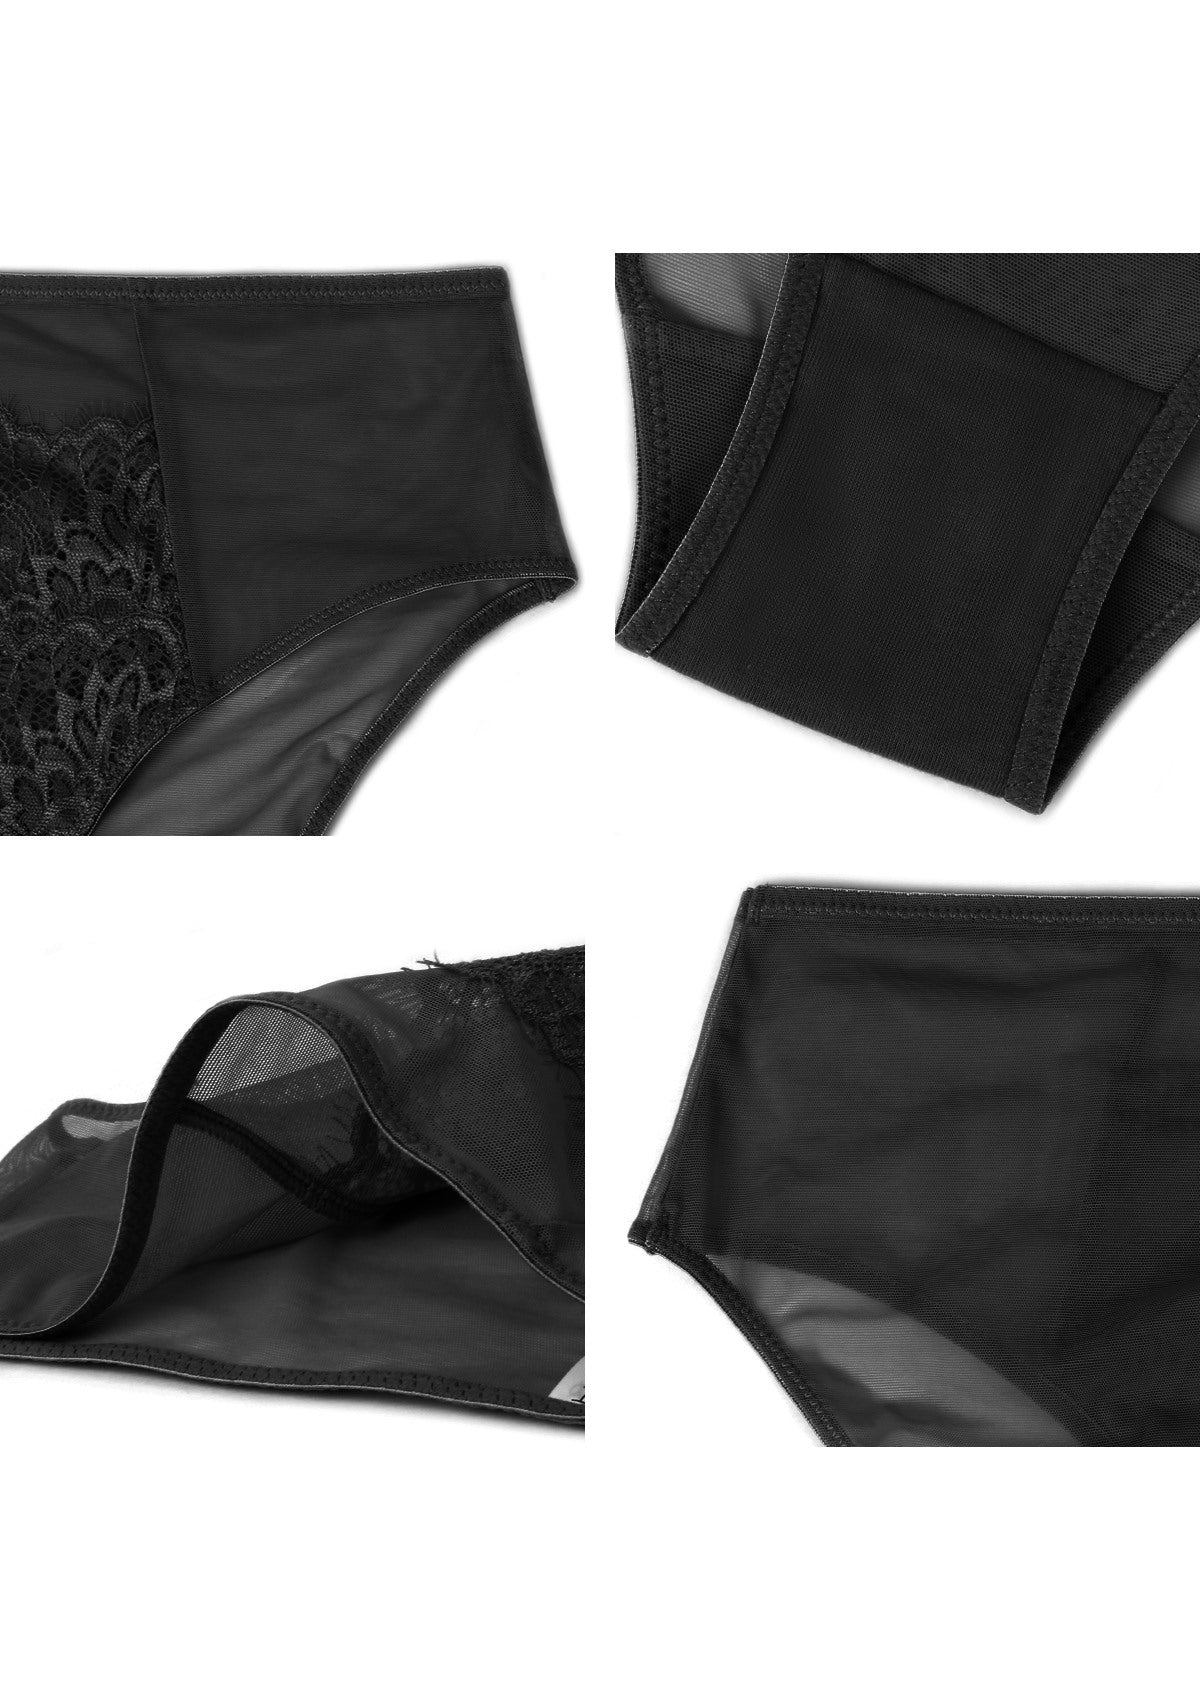 HSIA Spring Romance High-Rise Floral Lacy Panty-Comfort In Style - XL / Black